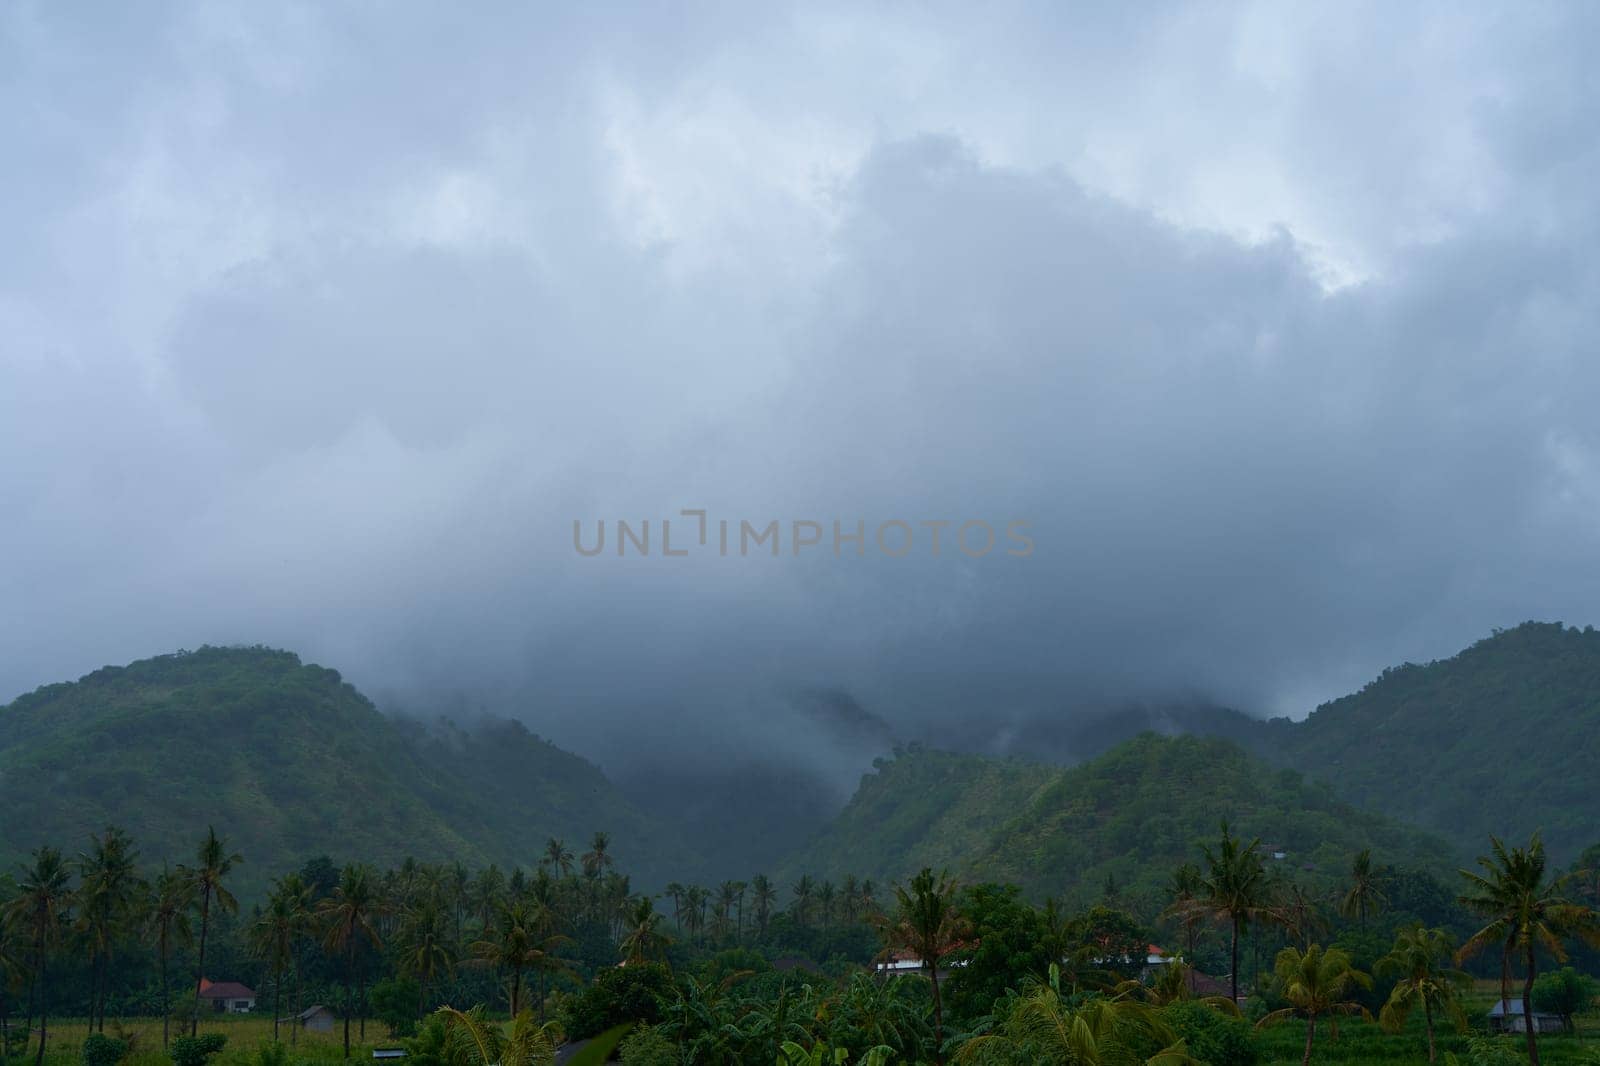 A tropical rainstorm in a rice field with cascading mountains and palm trees